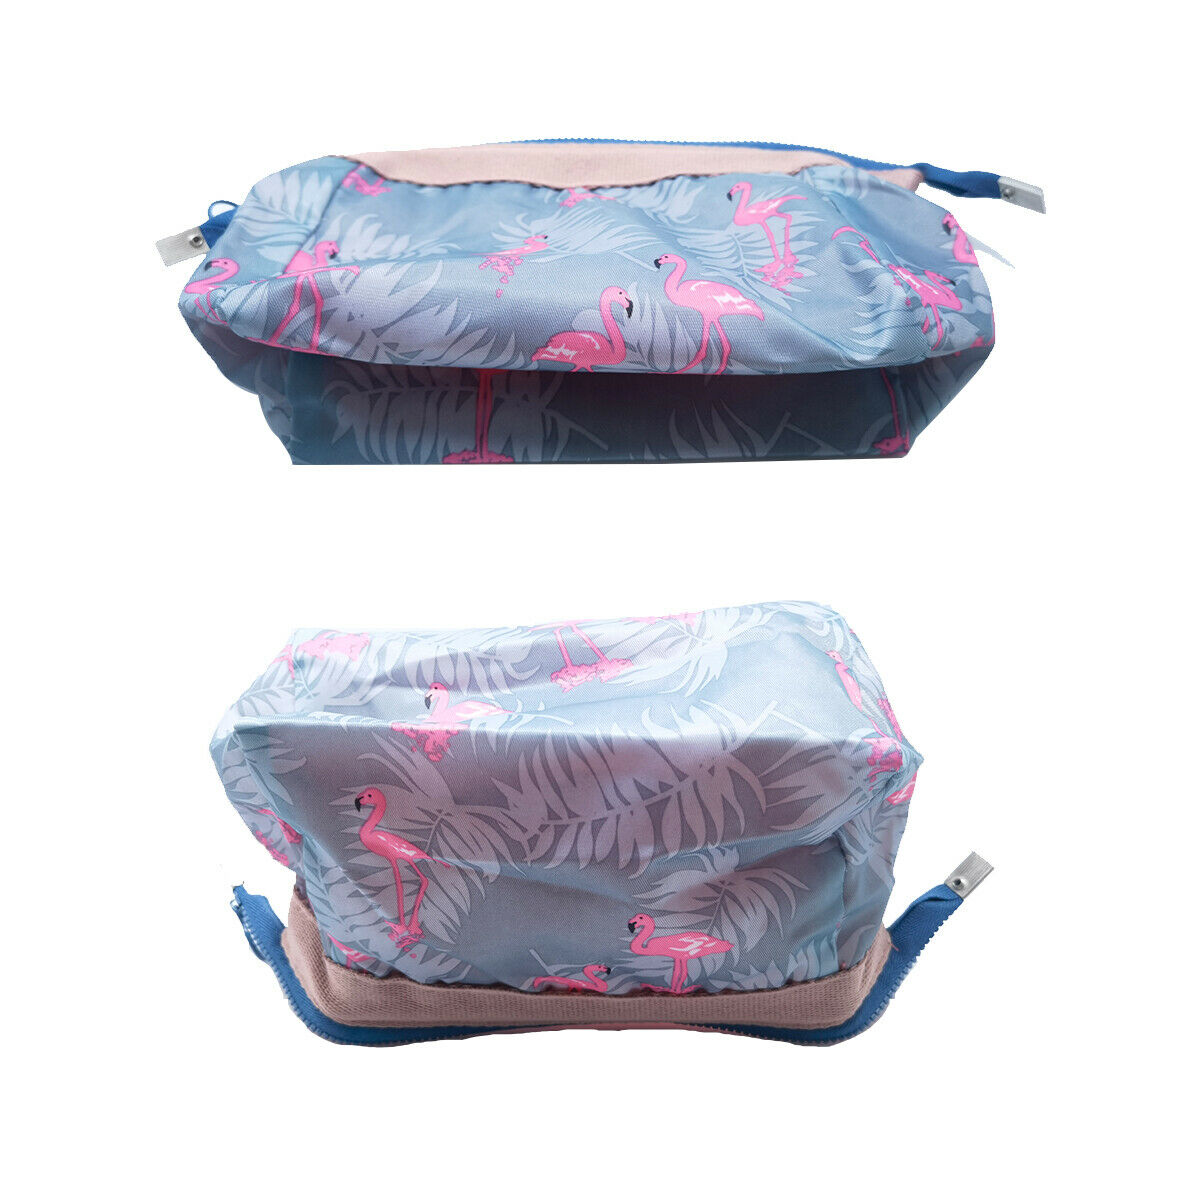 Waterproof Cosmetic Makeup Bag Travel Washing Toiletry Case Pouch Organizer